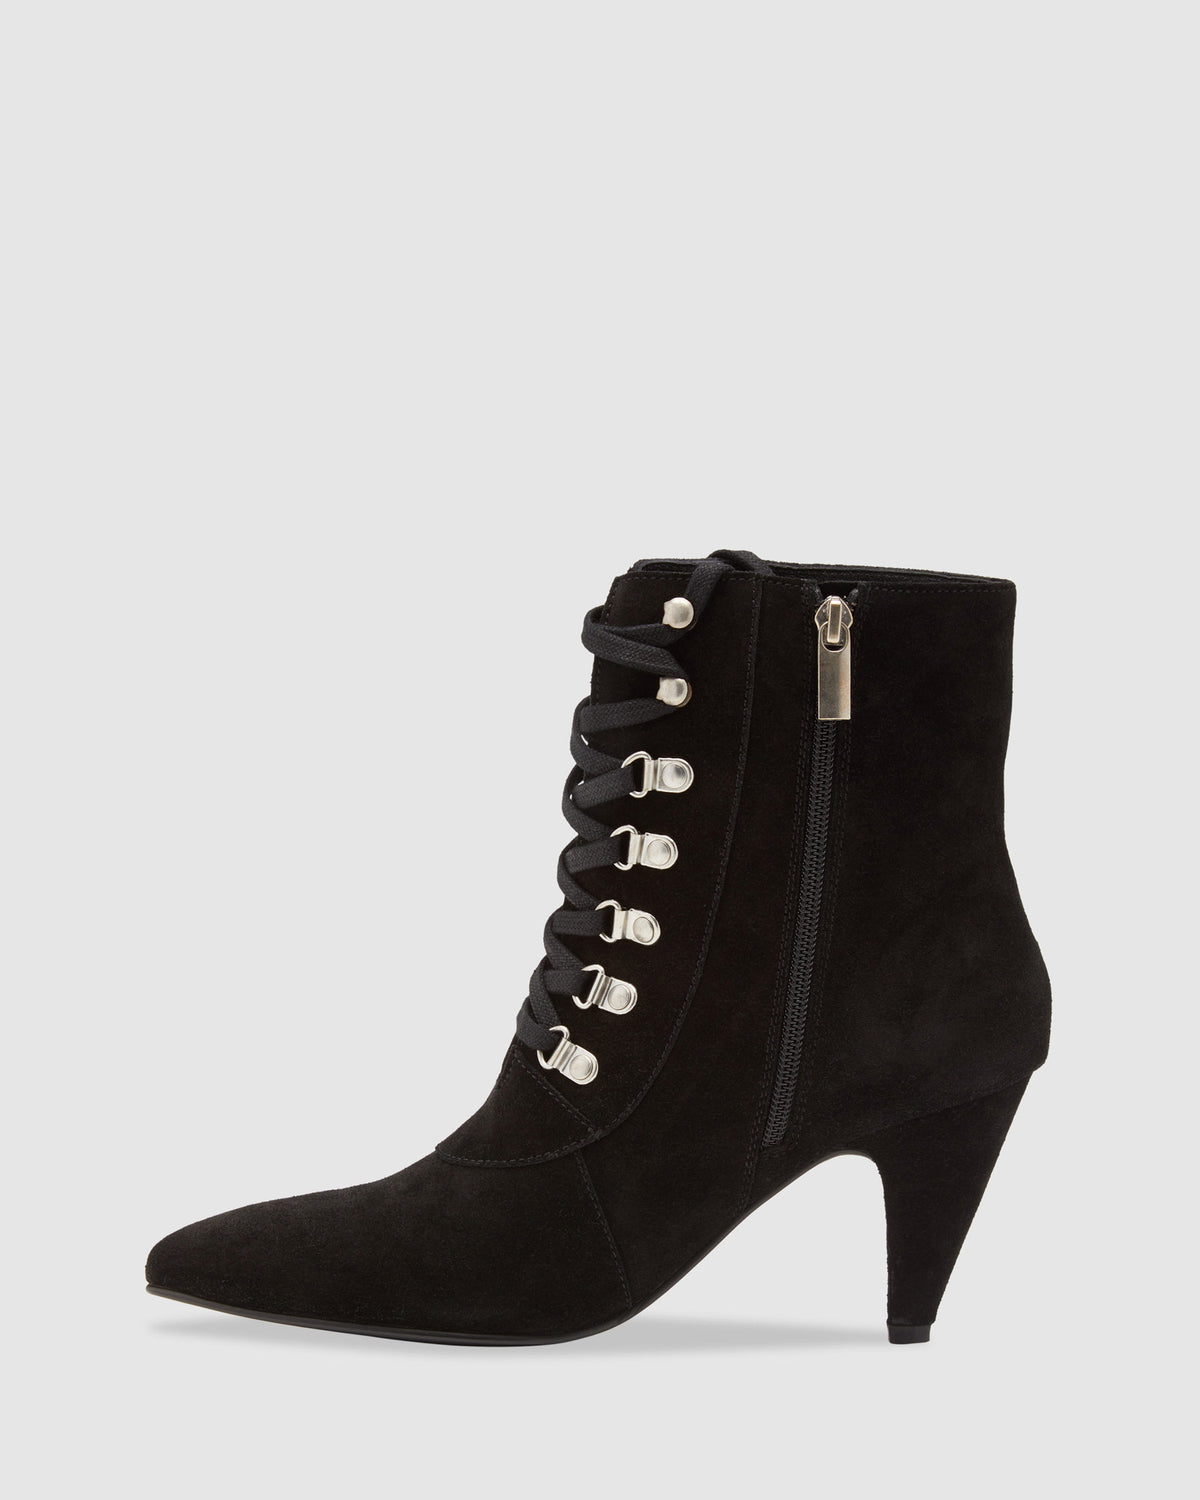 ROCHELLE SUEDE LACE UP BOOT